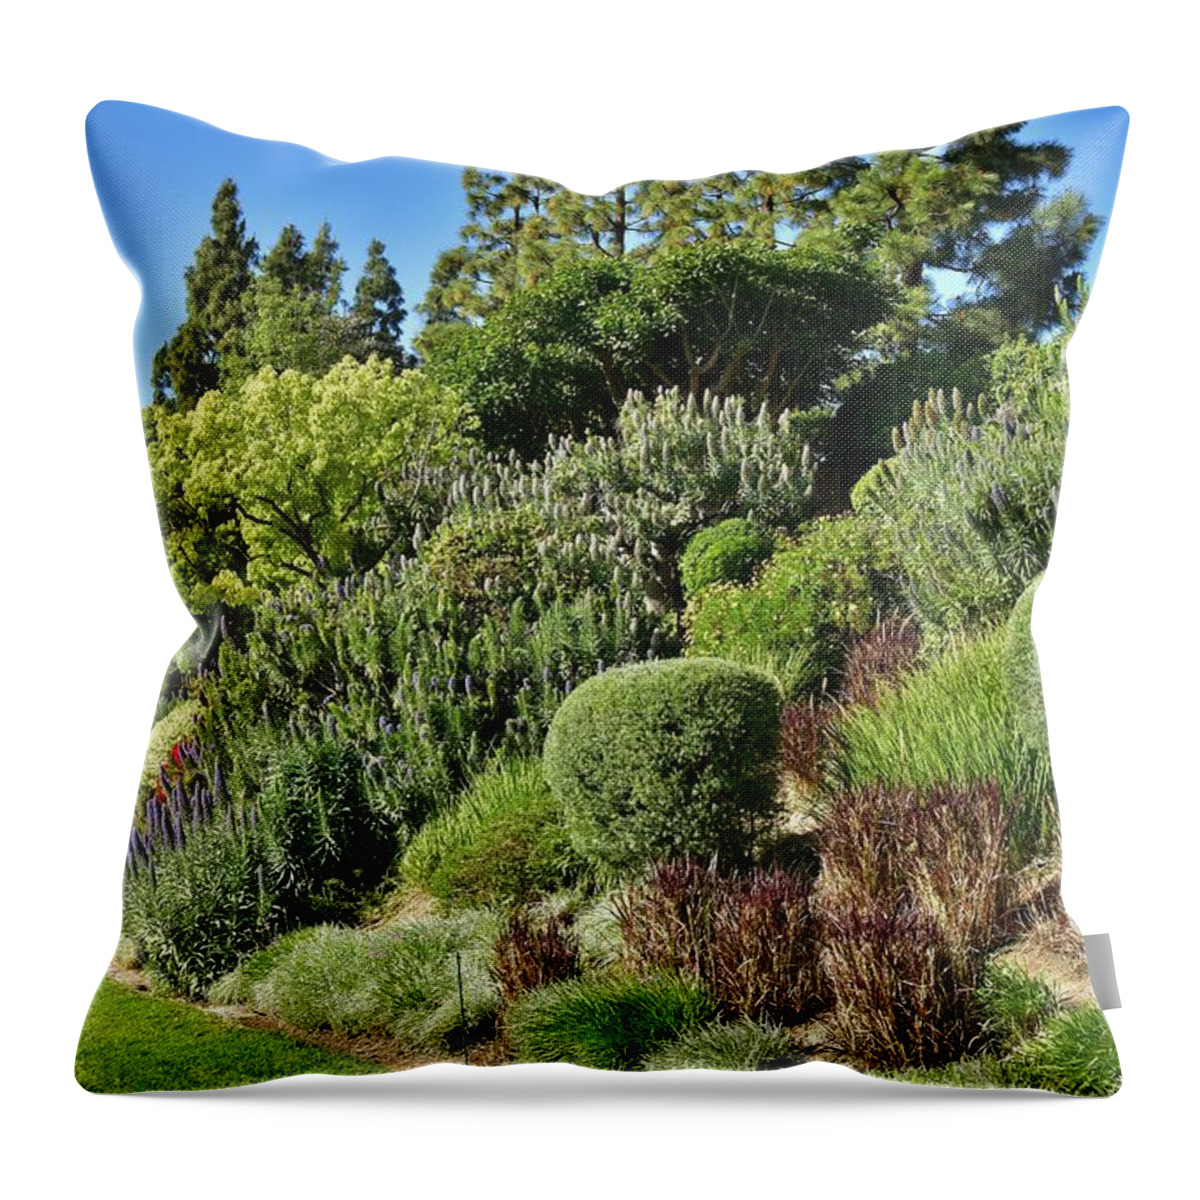 Linda Brody Throw Pillow featuring the photograph Veronica spicata Royal Candles II by Linda Brody